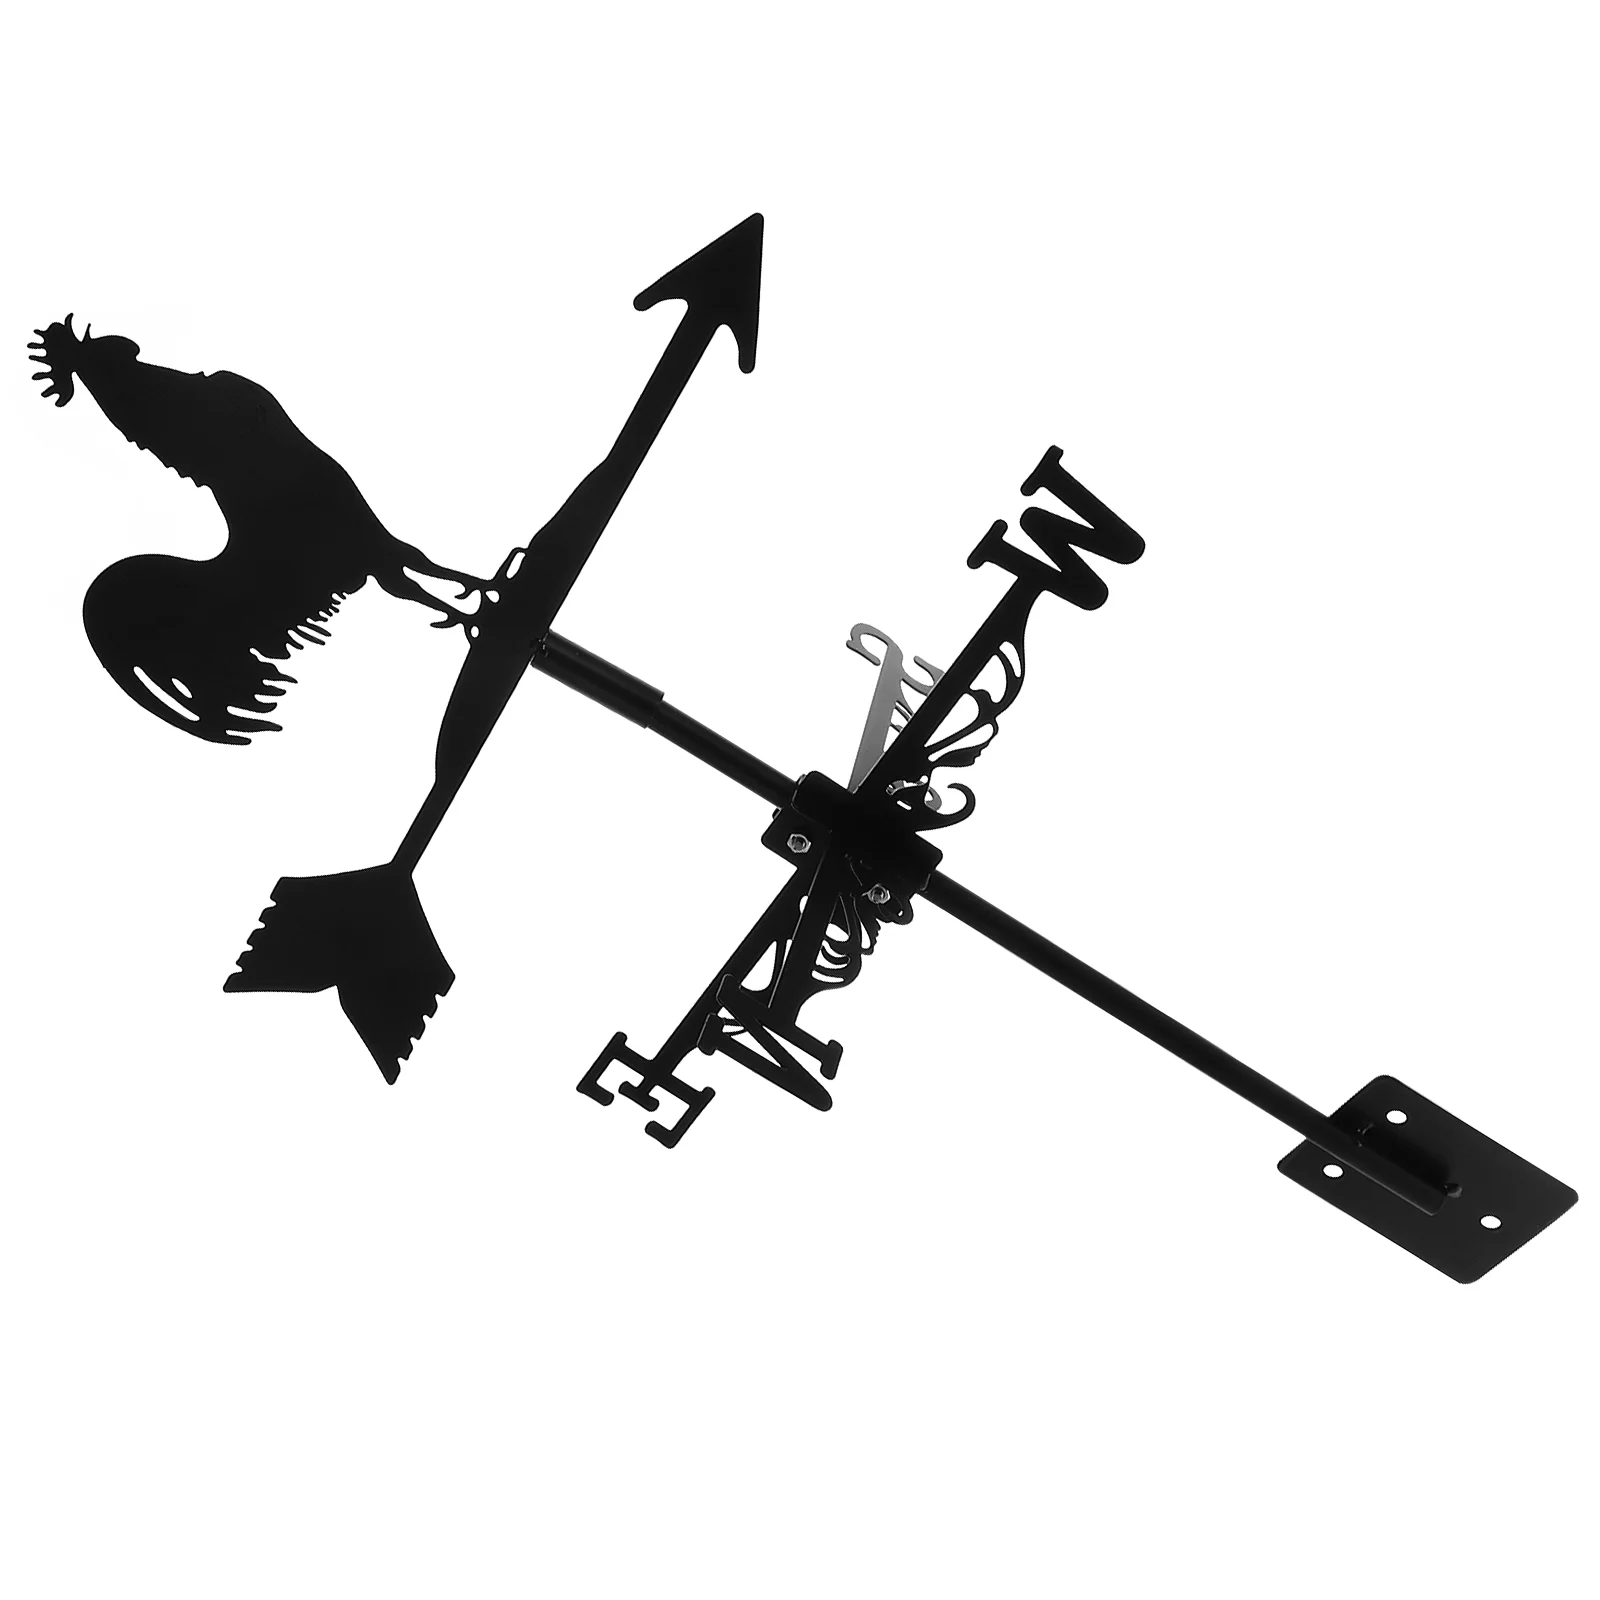 

Rooster Weathervane Wind Direction Indicator European Style Weather Vane for Roof Garden Patio